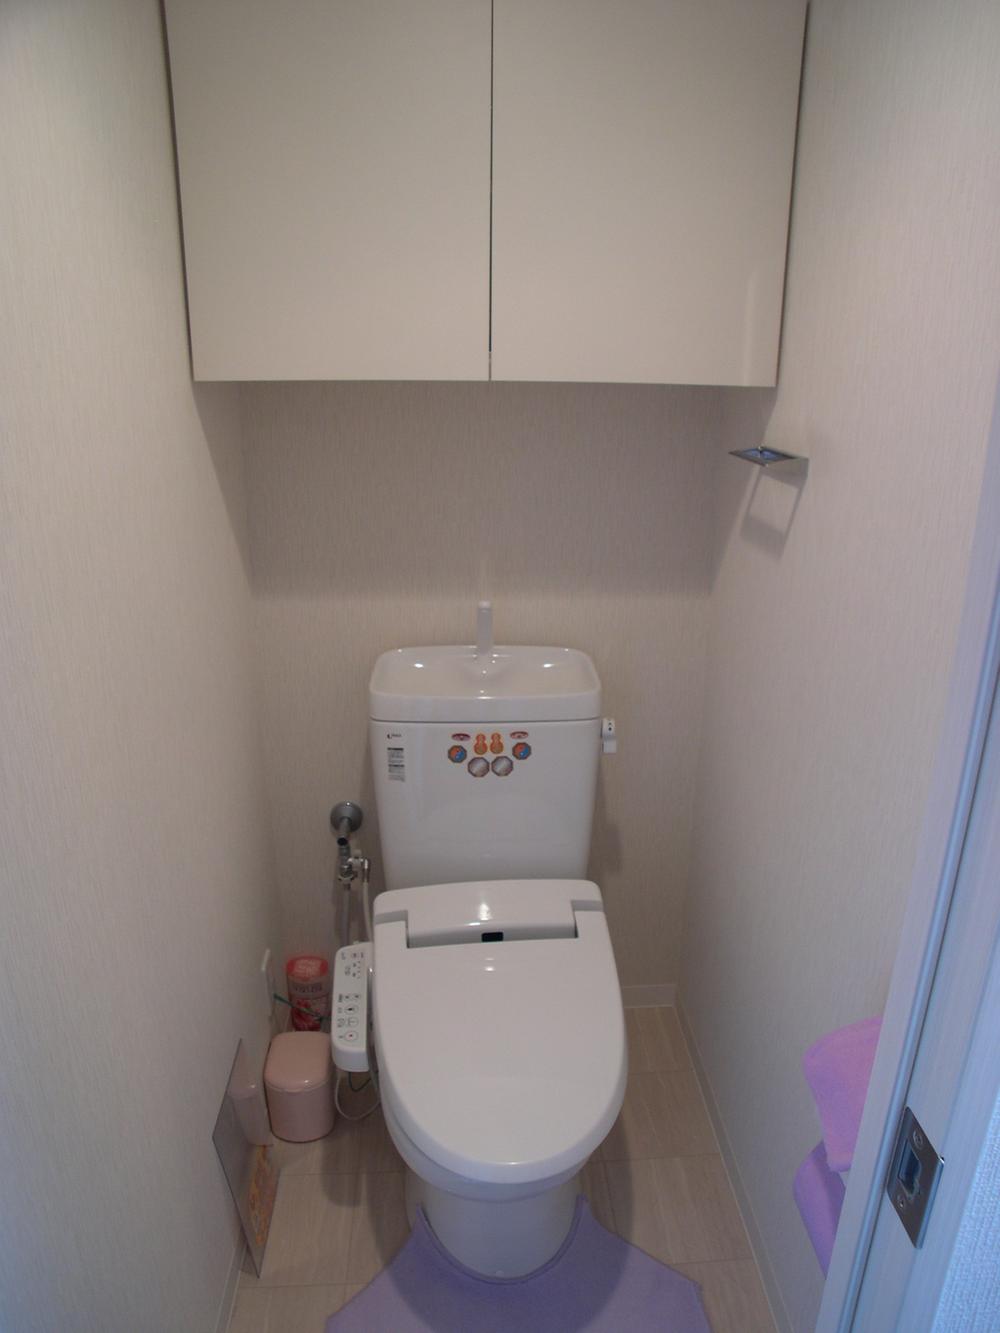 Toilet. WC of Washlet. There is also a cupboard hanging Maeru the paper kind.